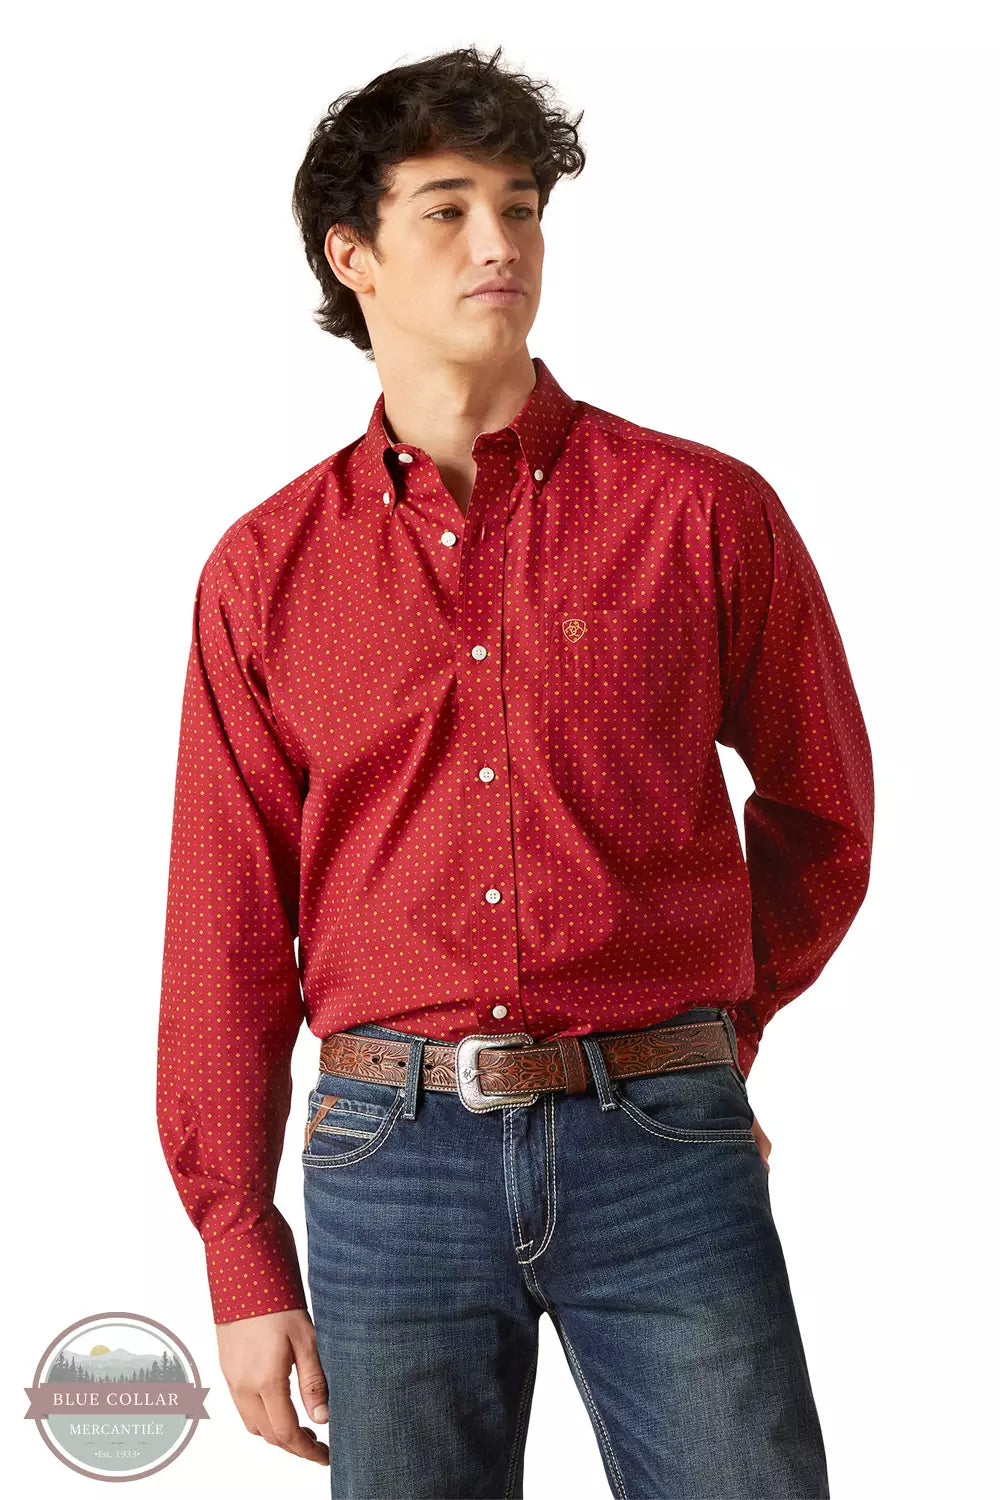 Ariat 10046203 Wrinkle Free Kaisen Classic Fit Long Sleeve Shirt in Biking Red Front View